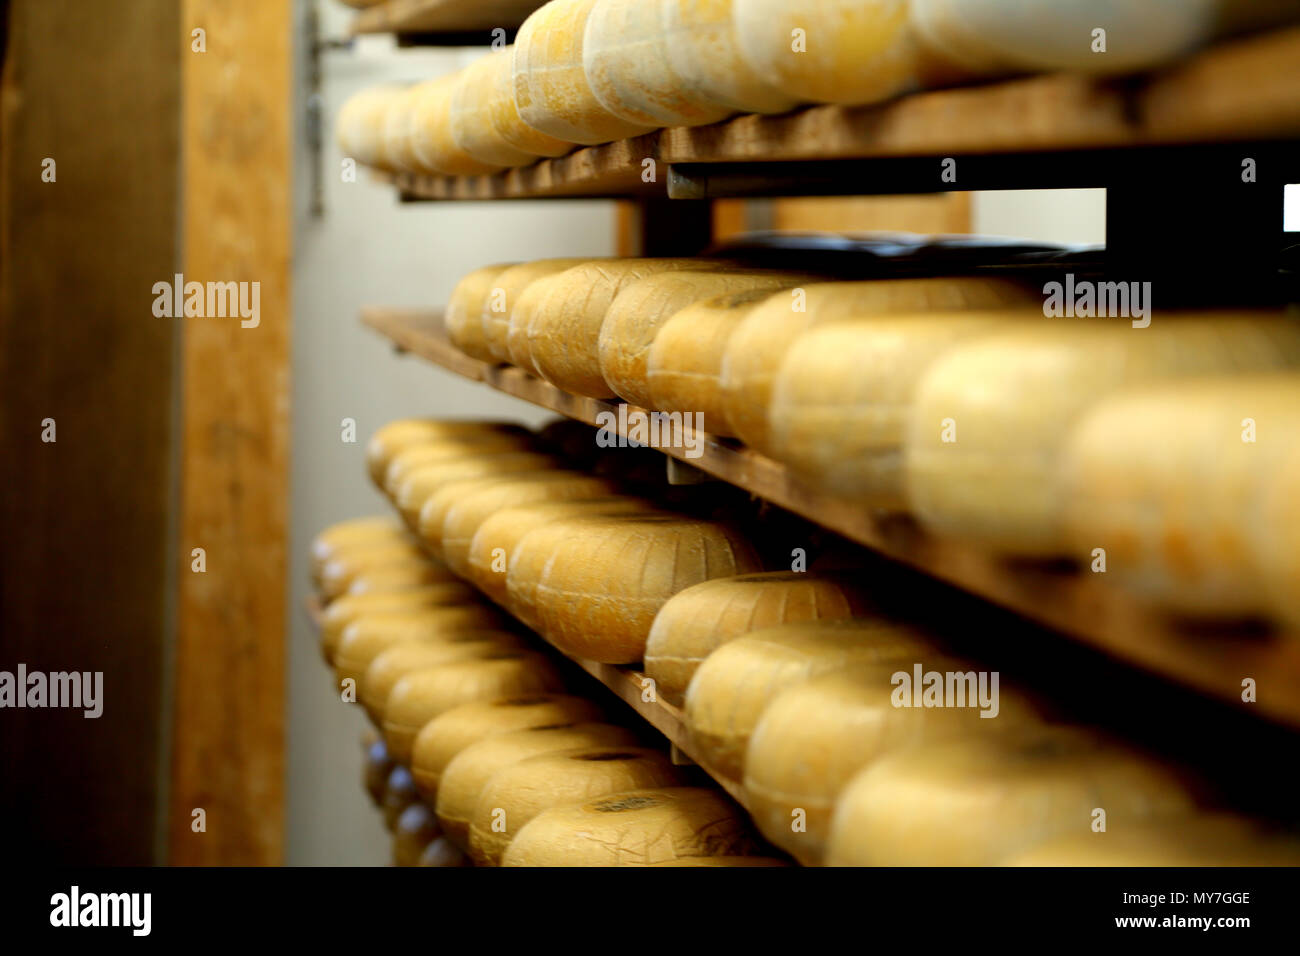 Shelves of hard cheeses stored to mature in ageing room Stock Photo